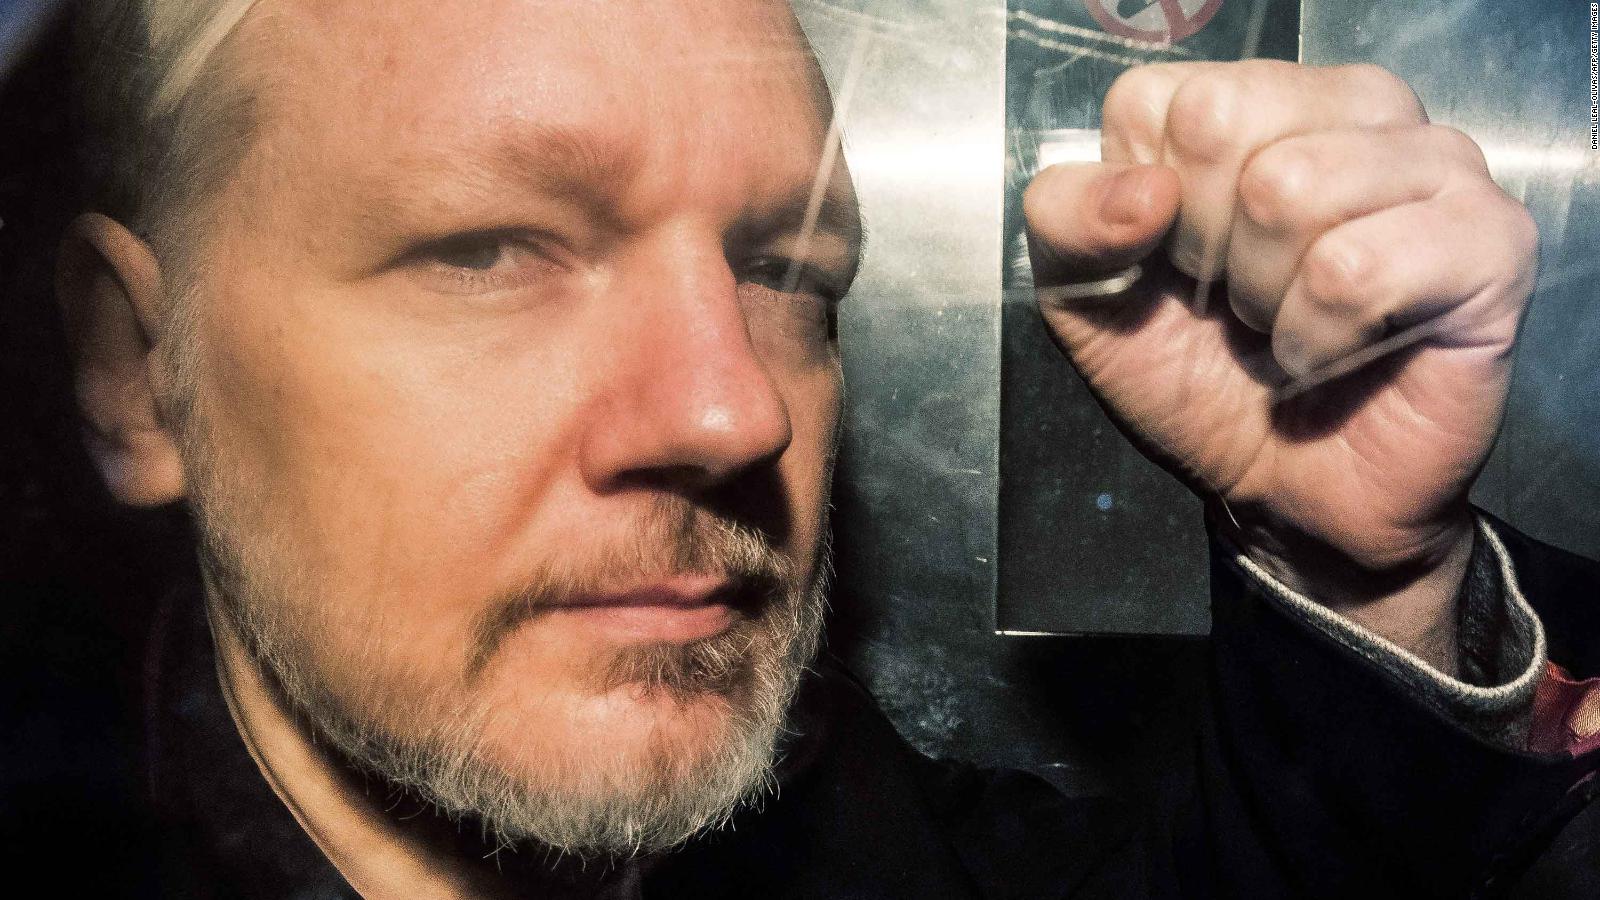 Julian Assange has been able to appeal the extradition ruling